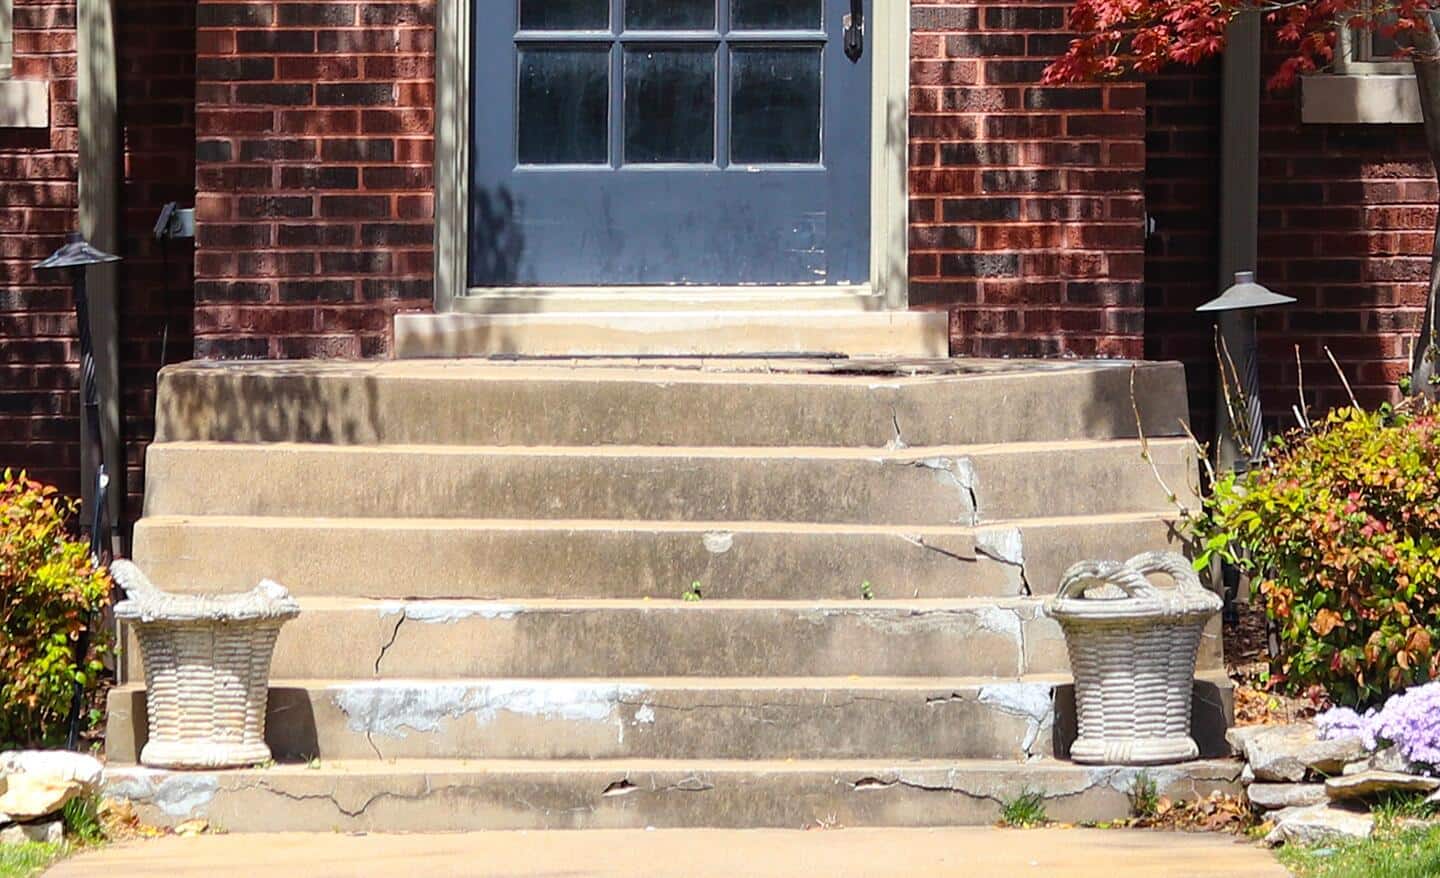 Cracked concrete steps leading up to a door.